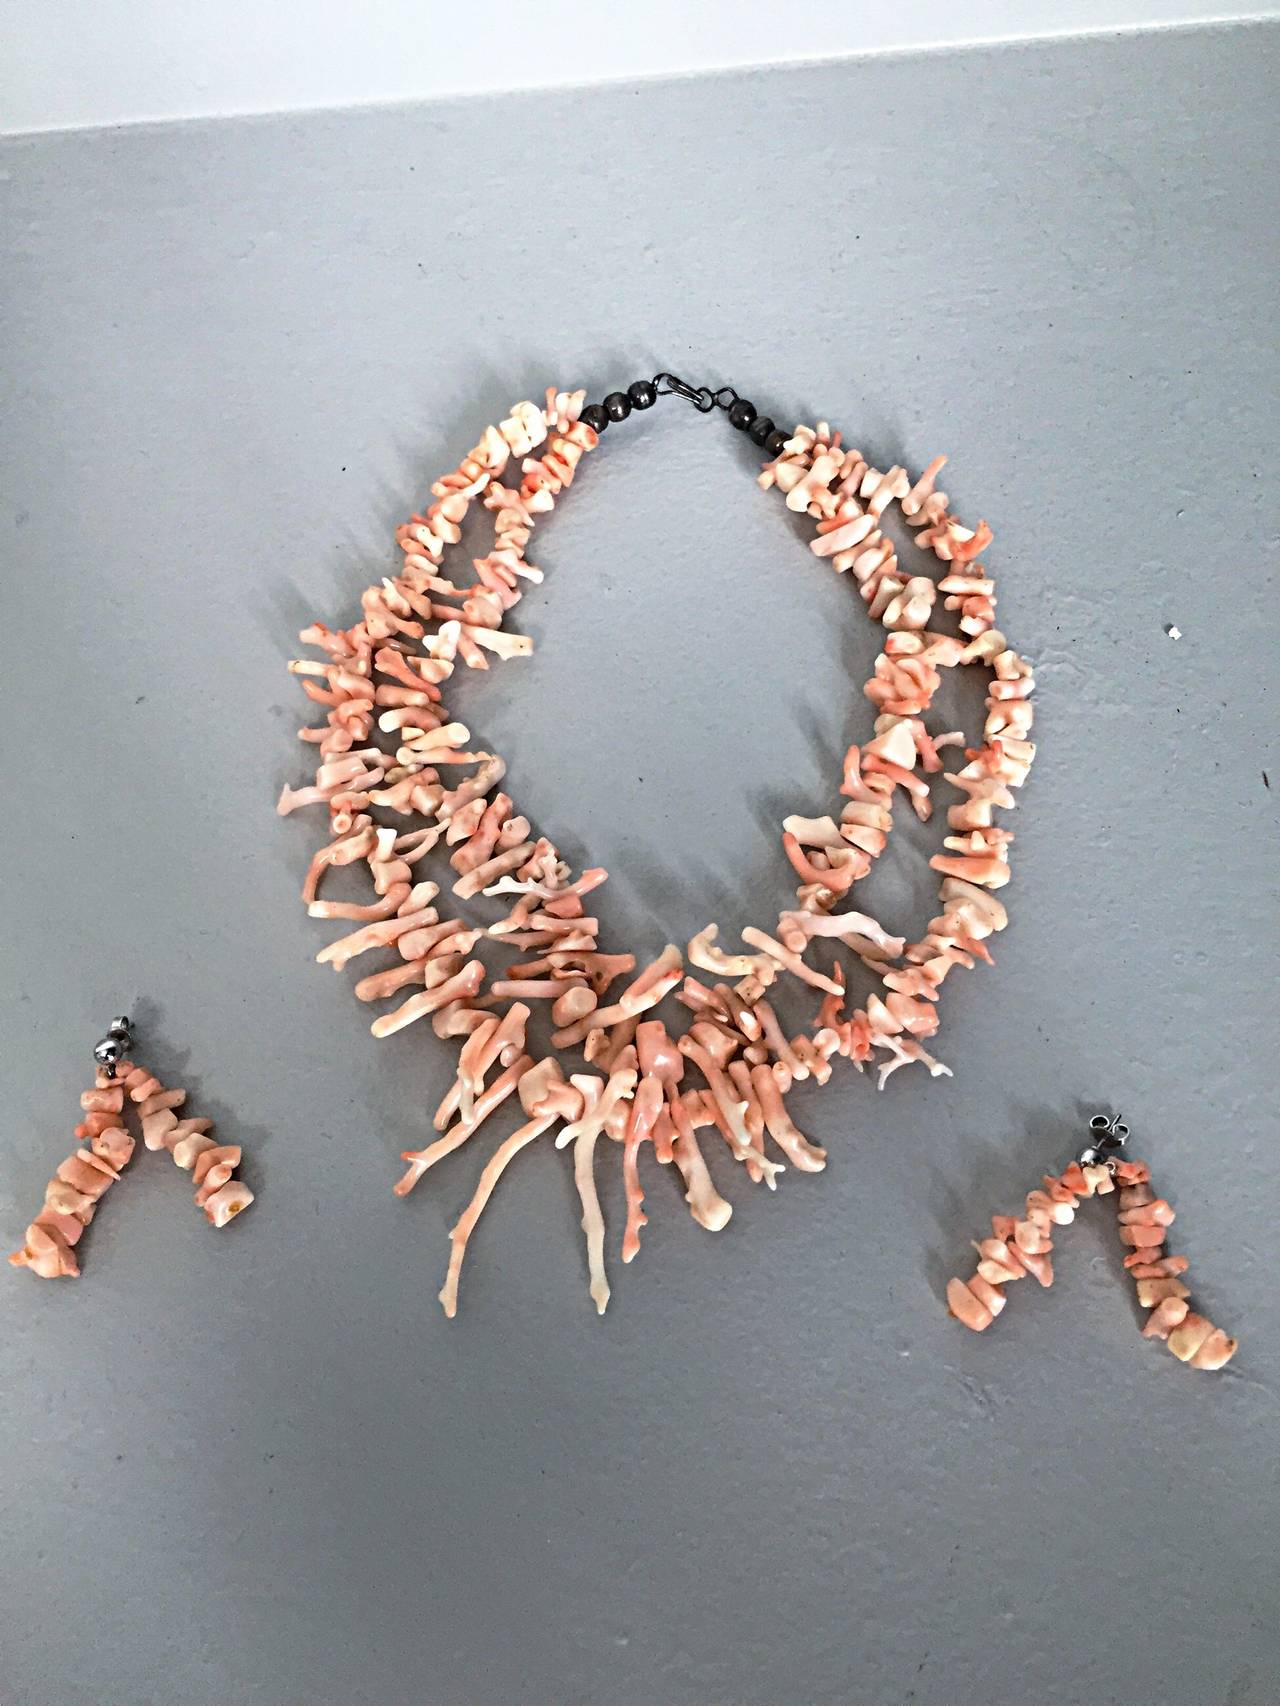 Stunning vintage Angel Skin coral necklace and earrings set! Necklace features a double strand of long branch Angel Skin coral, and earrings feature double strands of Angel Skin coral. Very rare to find this type of coral in this size! Beautiful